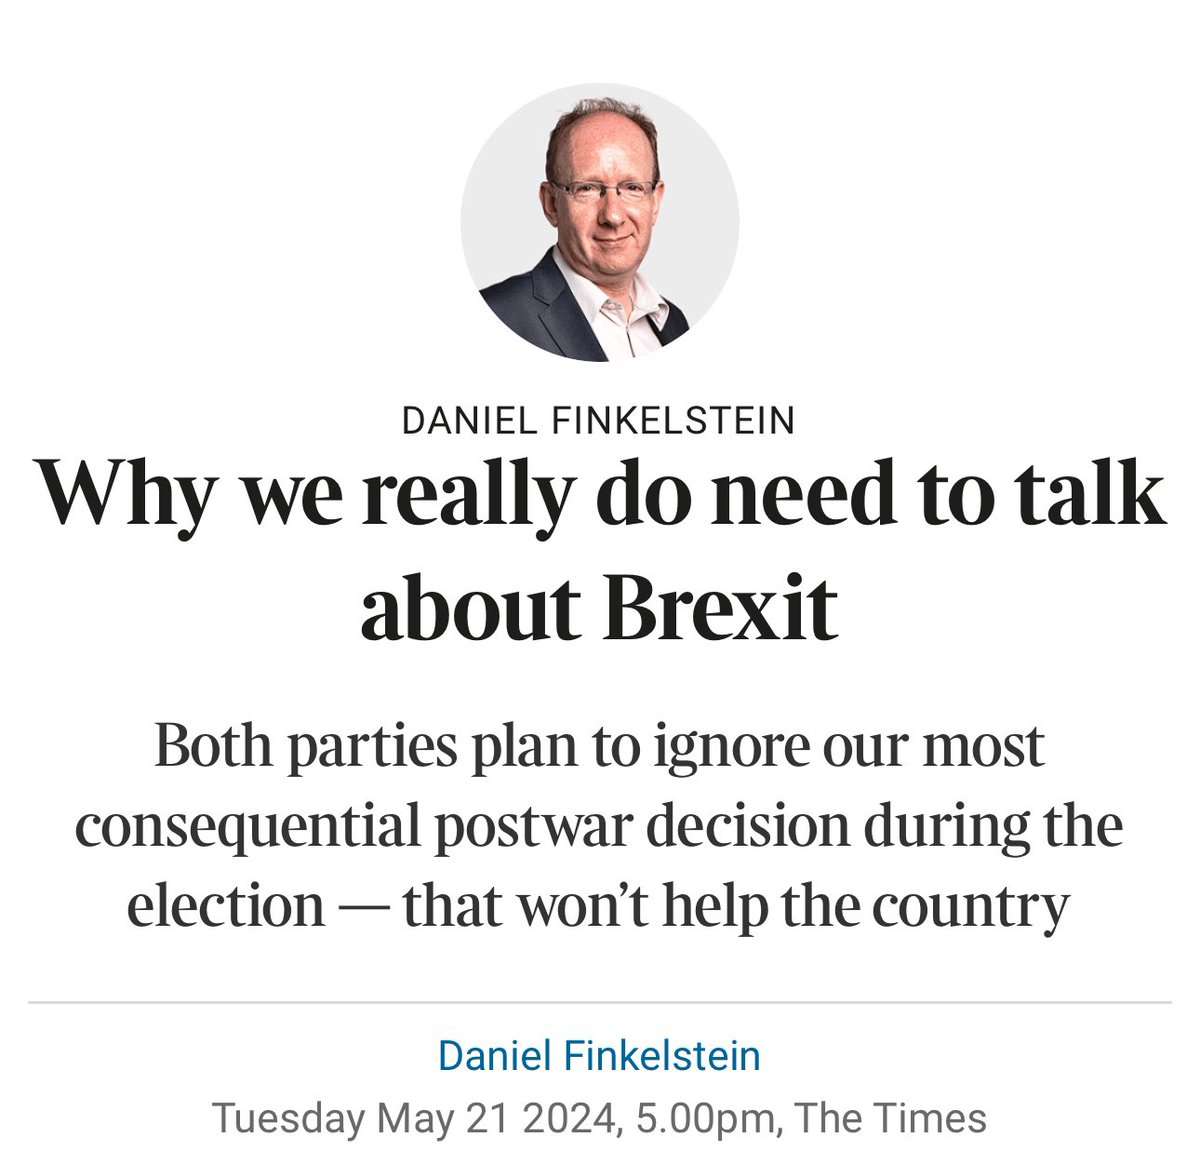 Yes we really do need to talk about Brexit @Dannythefink 👏 Brexit was sold on a false prospectus and Truss madness proves that Britain doesn’t want that reality. Britain accepted poll tax failed and undid it and we have to do the same with Brexit! thetimes.co.uk/article/8b77fb…